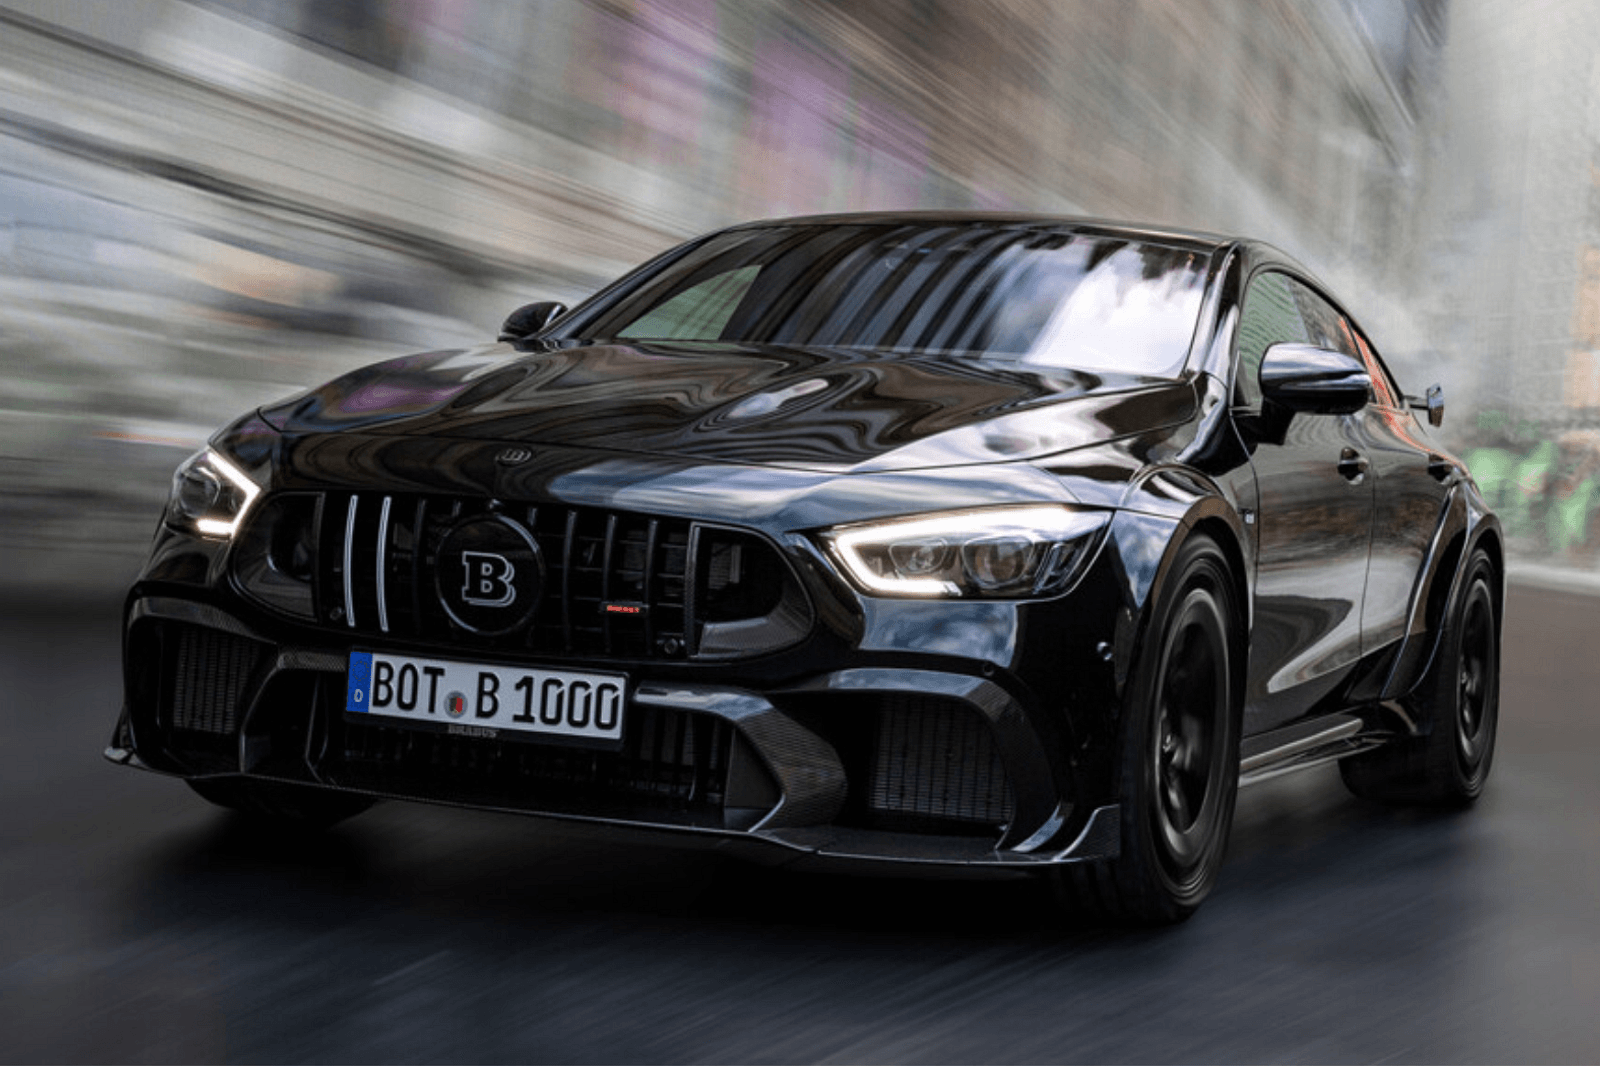 Brabus Unleashes Insane Power with Mercedes-AMG GT 63 S E Performance Rocket, Boasting 986 HP